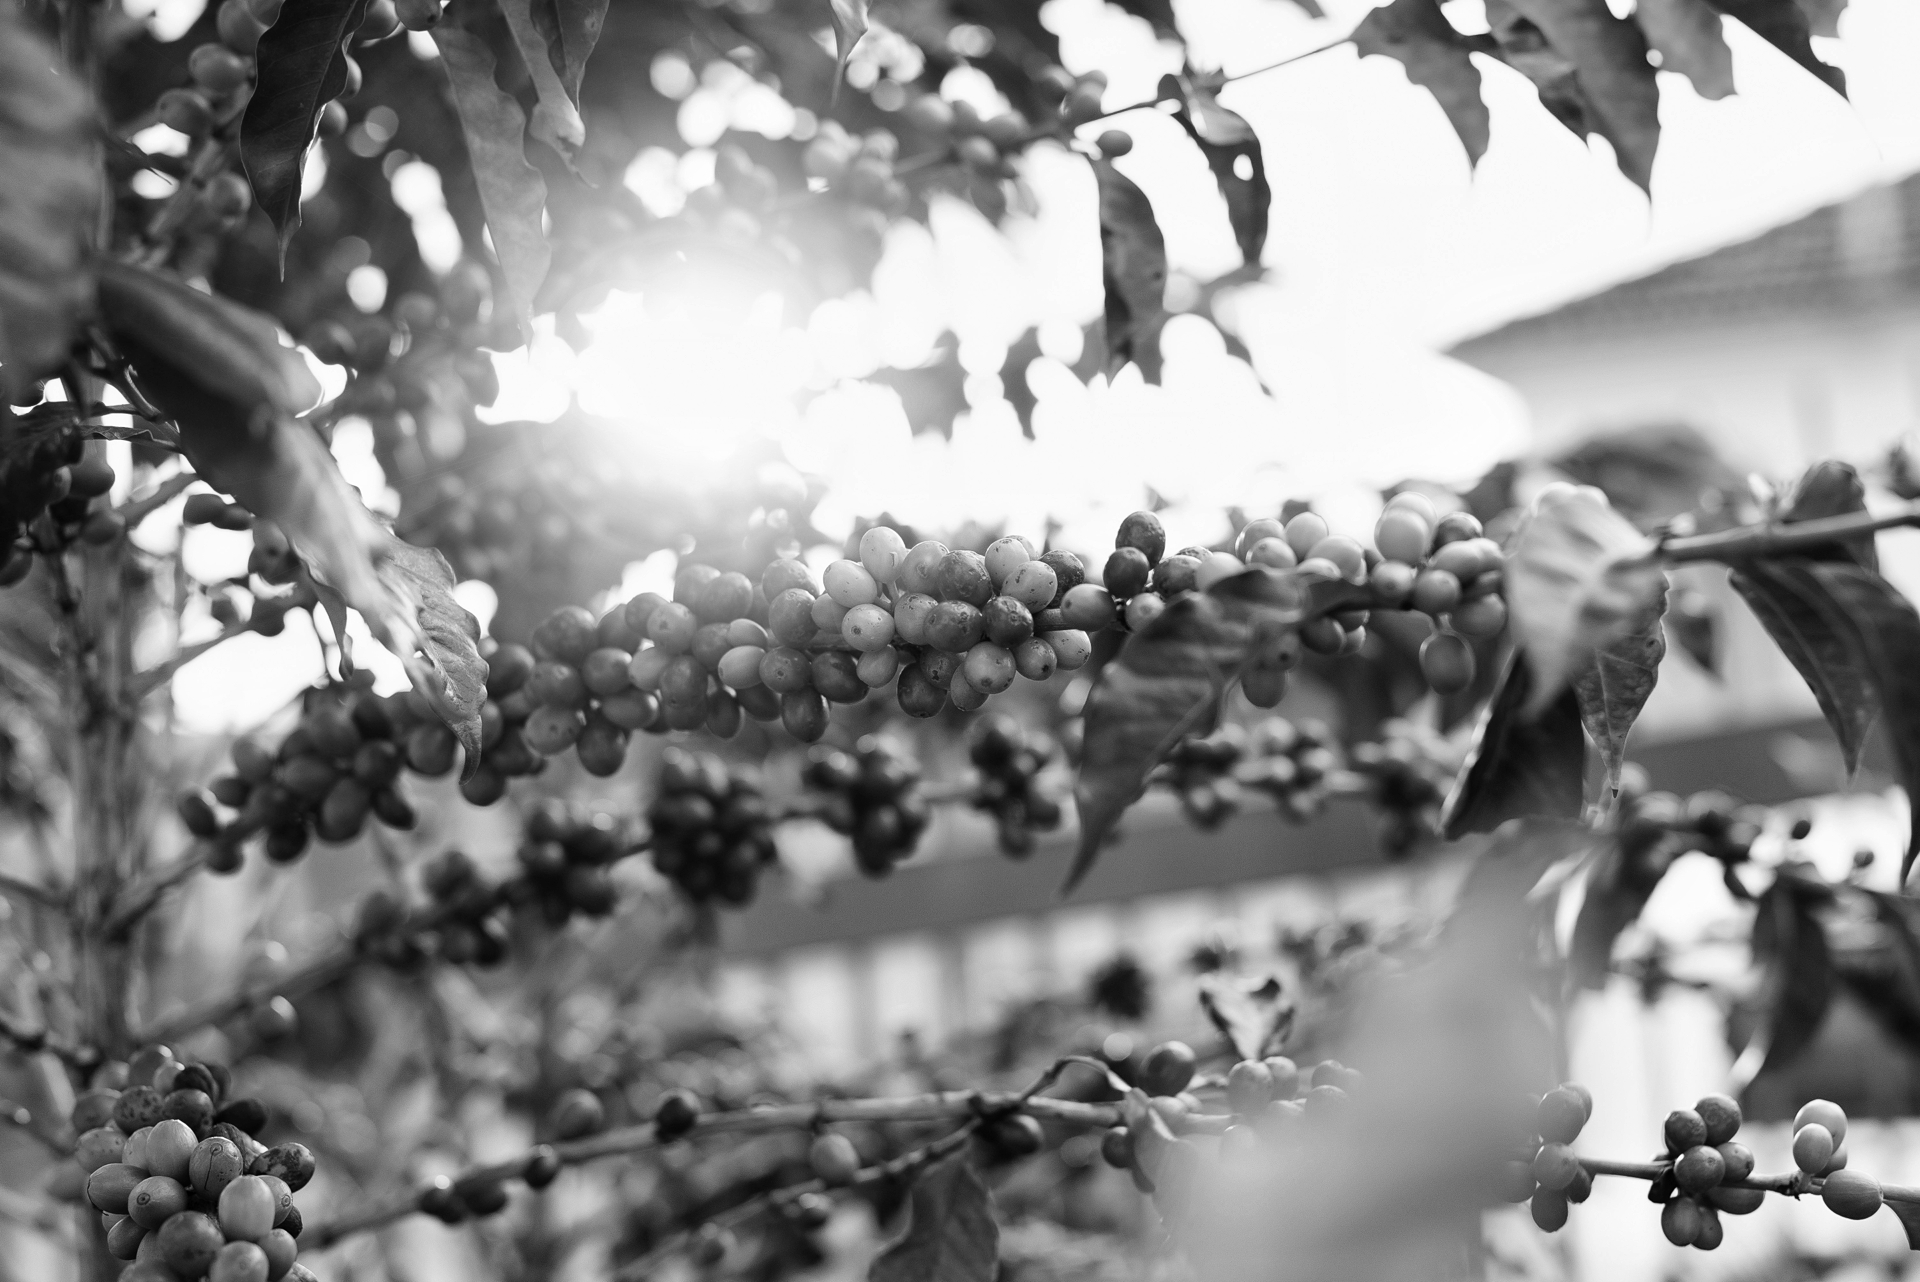 Coffee cherries on the branch, with the sun behind